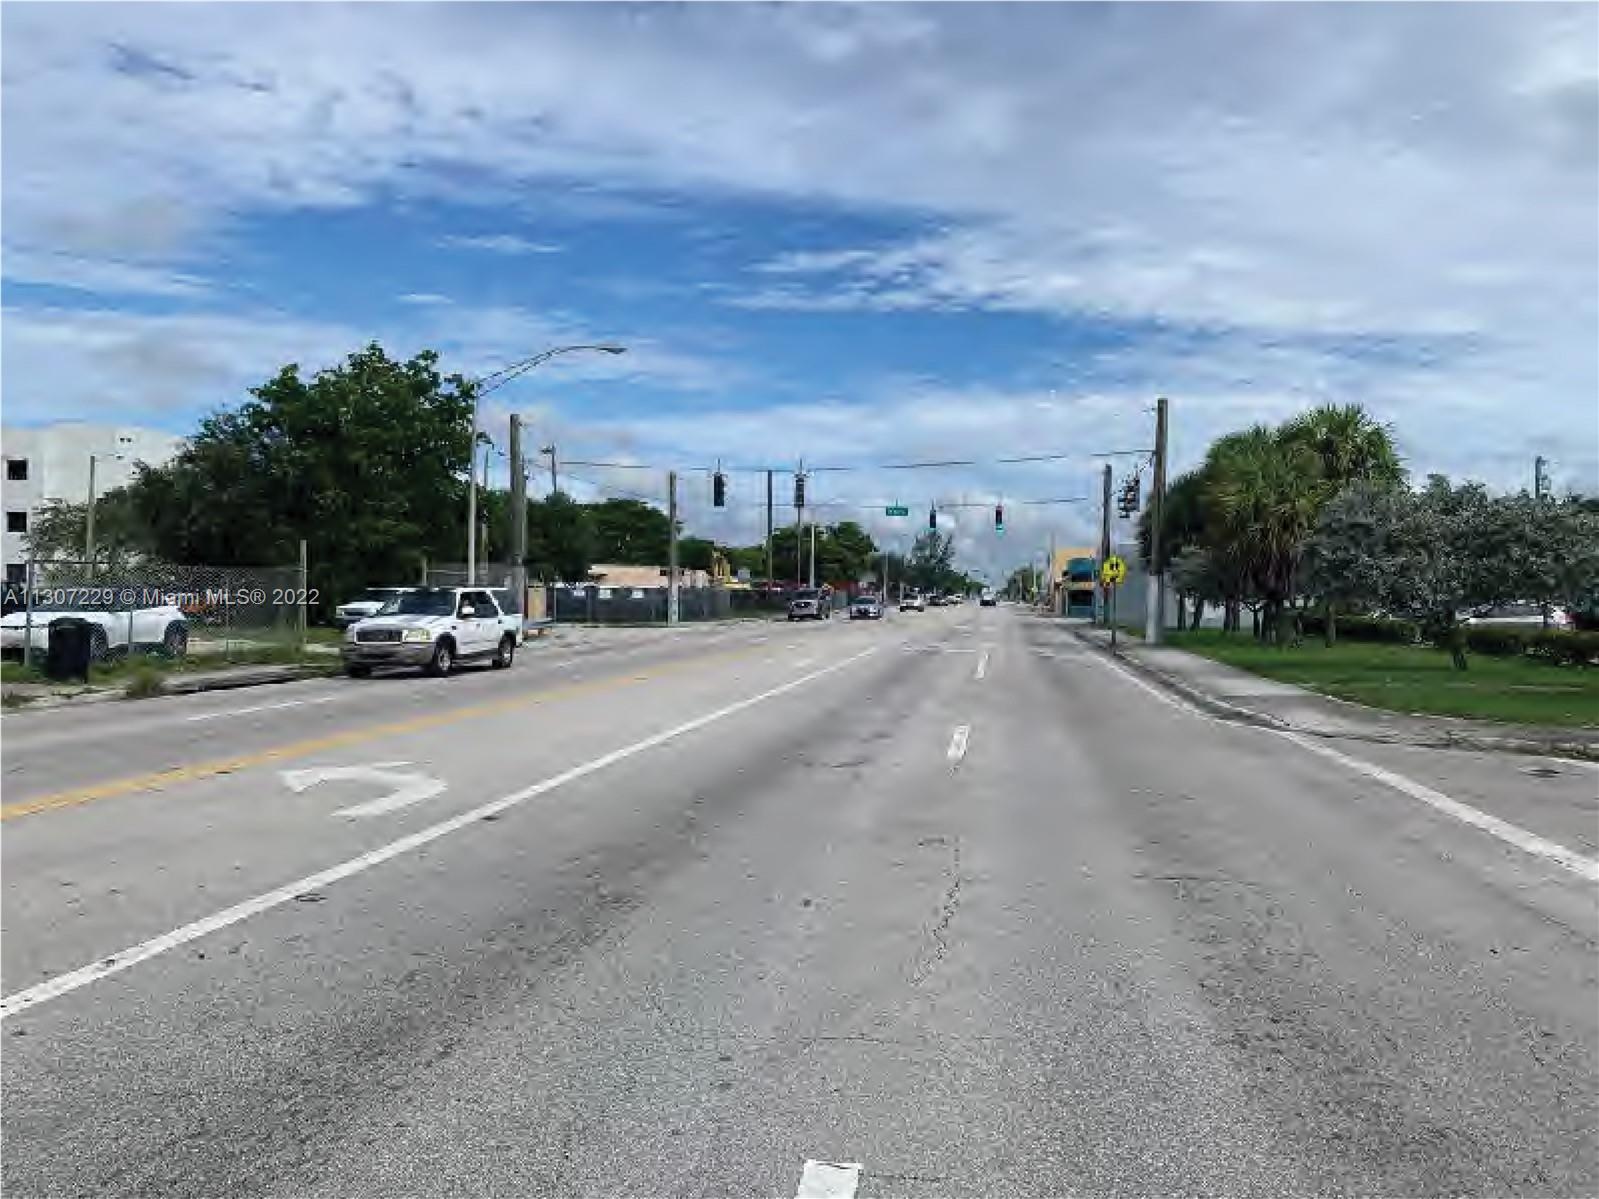 Over 20K cars per day on NW 17th Avenue